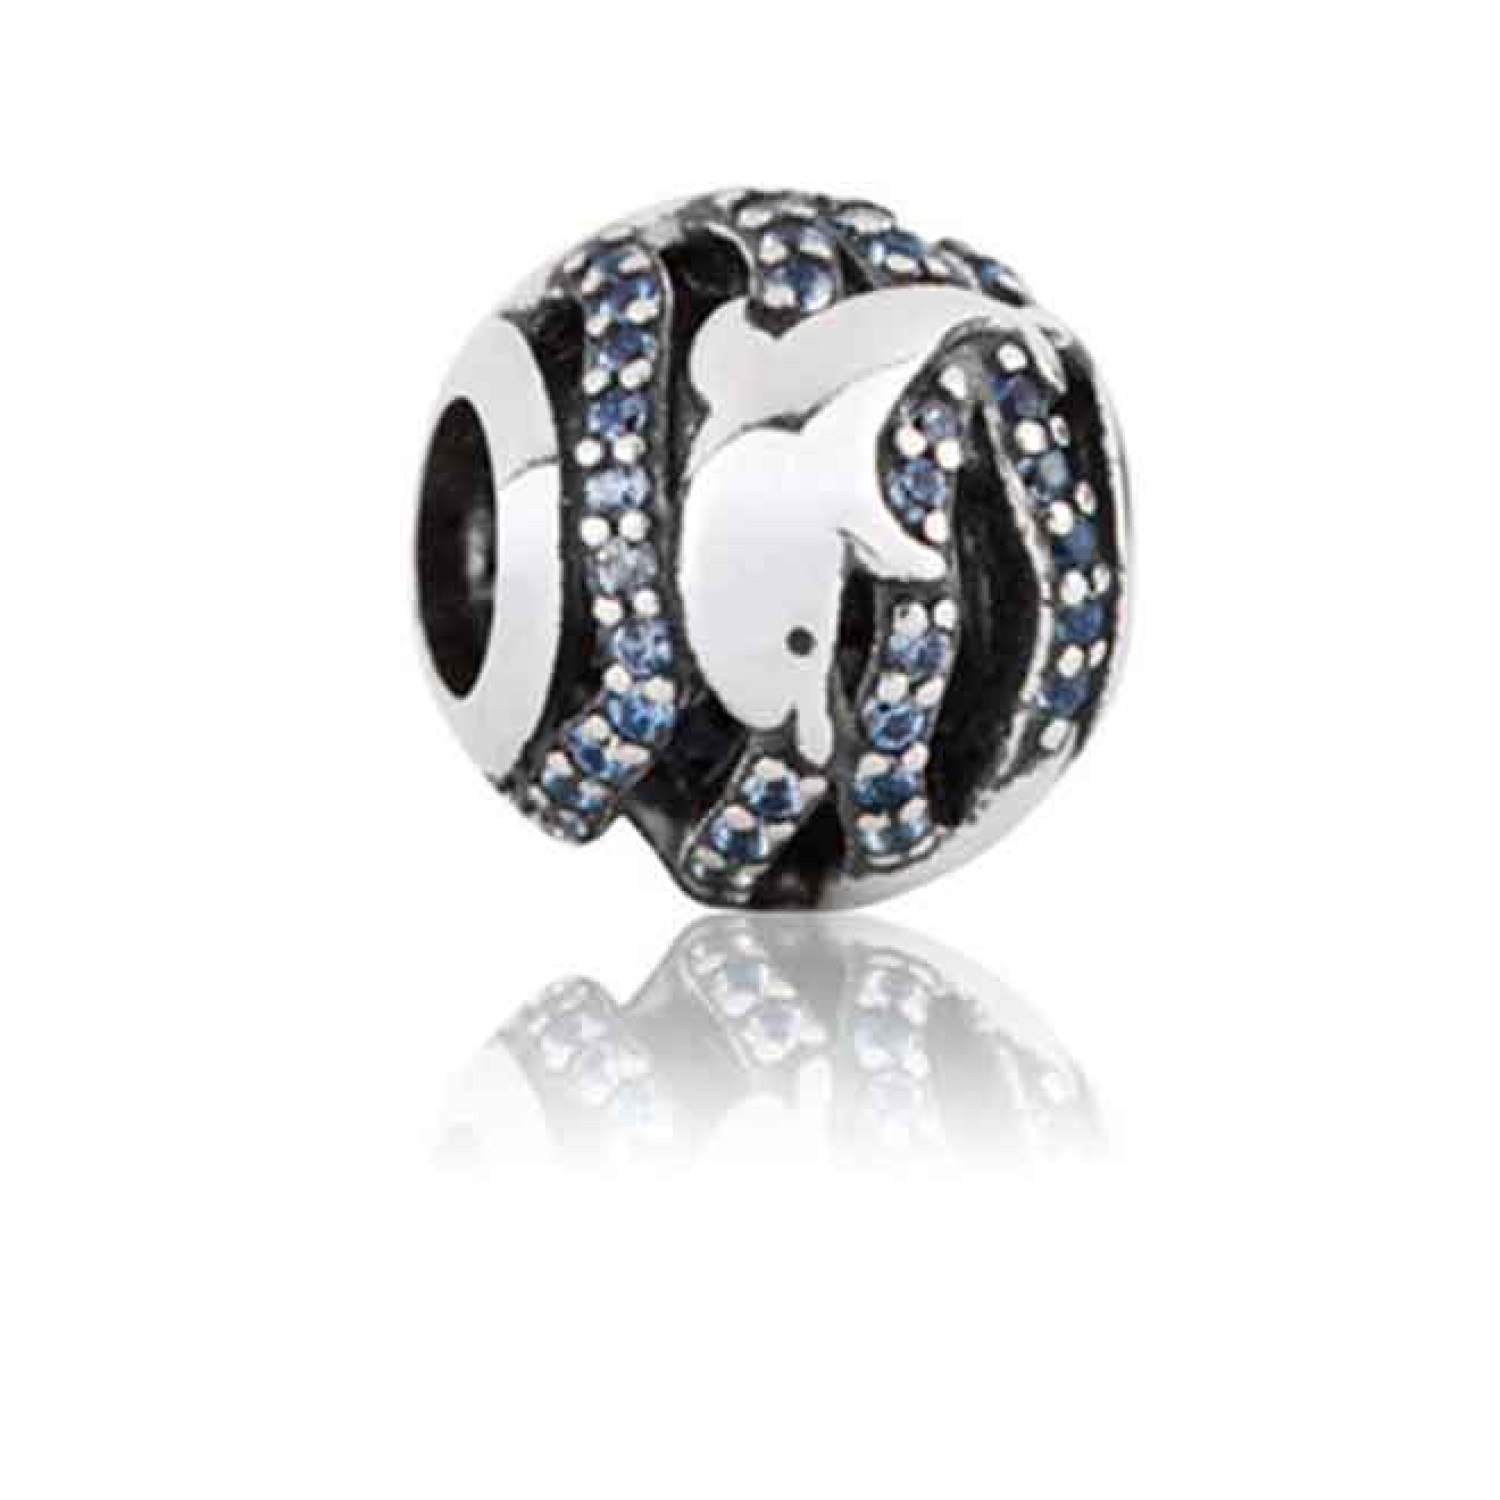 LK250CZ Evolve New Zealand Paciﬁc Dolphin Charm. A symbol of companionship, the playful dolphin lives in large social groups and forms close bonds with others. The sparkling blue cubic zirconia symbolises the glistening New Zealand waters, whilst the silv